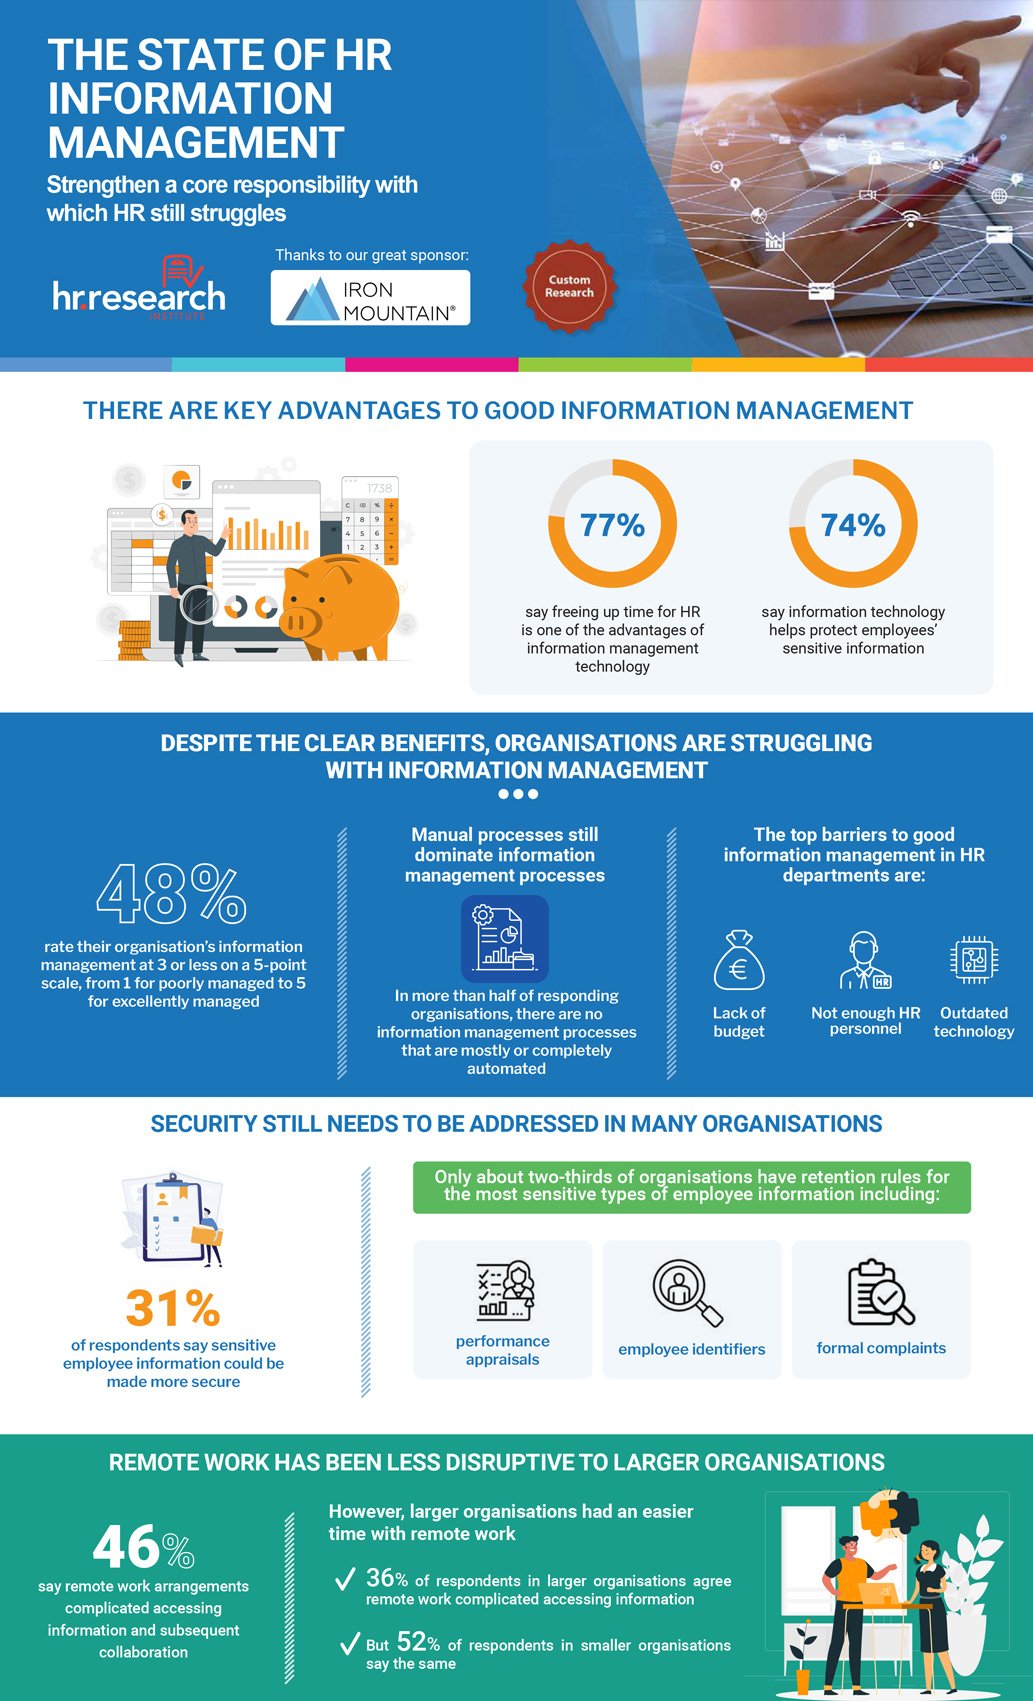 The State of HR Information Management